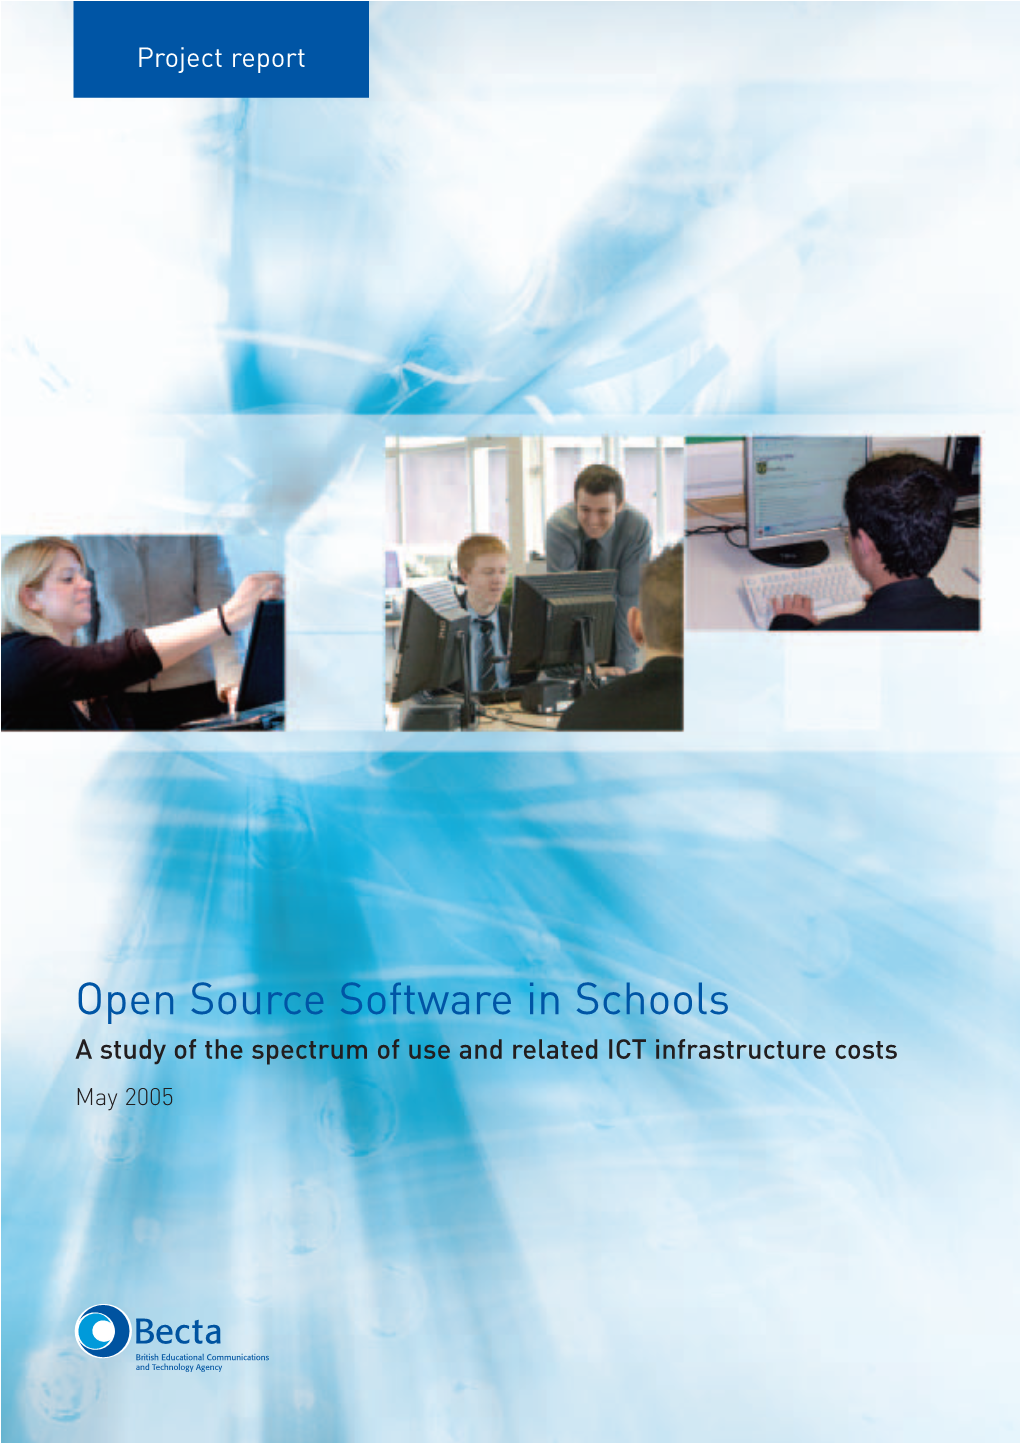 Open Source Software in Schools a Study of the Spectrum